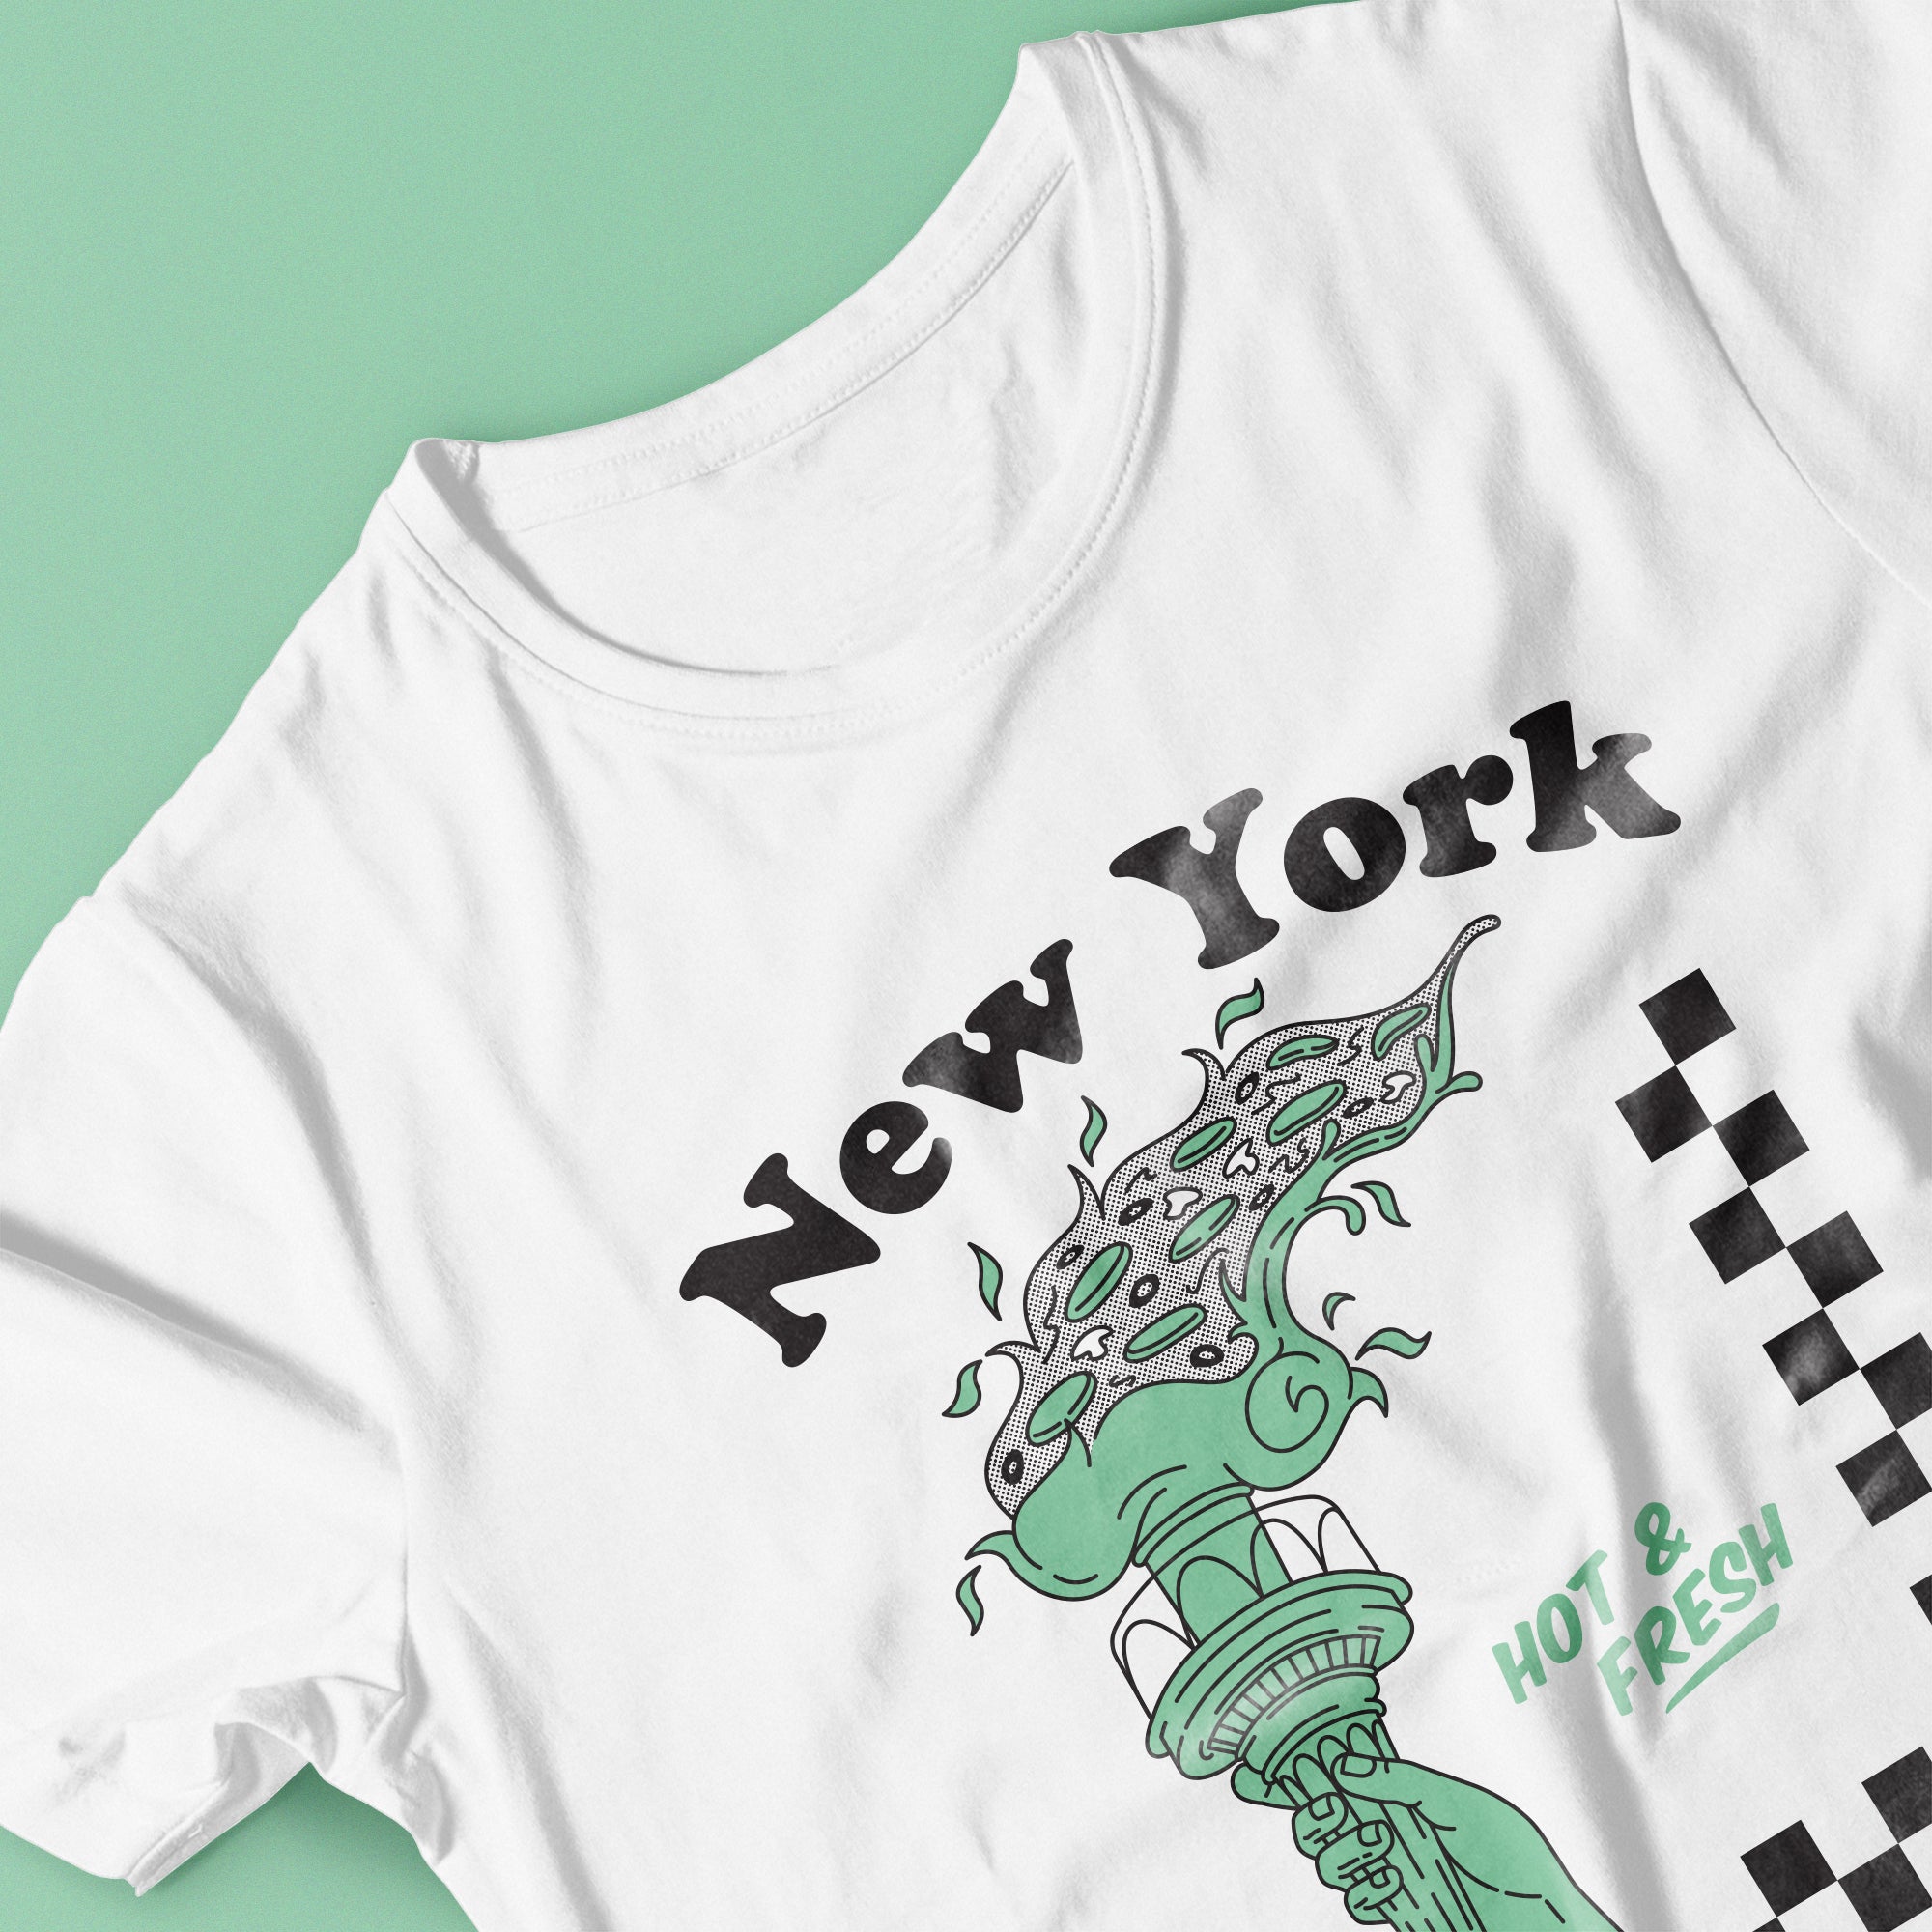 New York Hot and Fresh T-shirt by Lulab